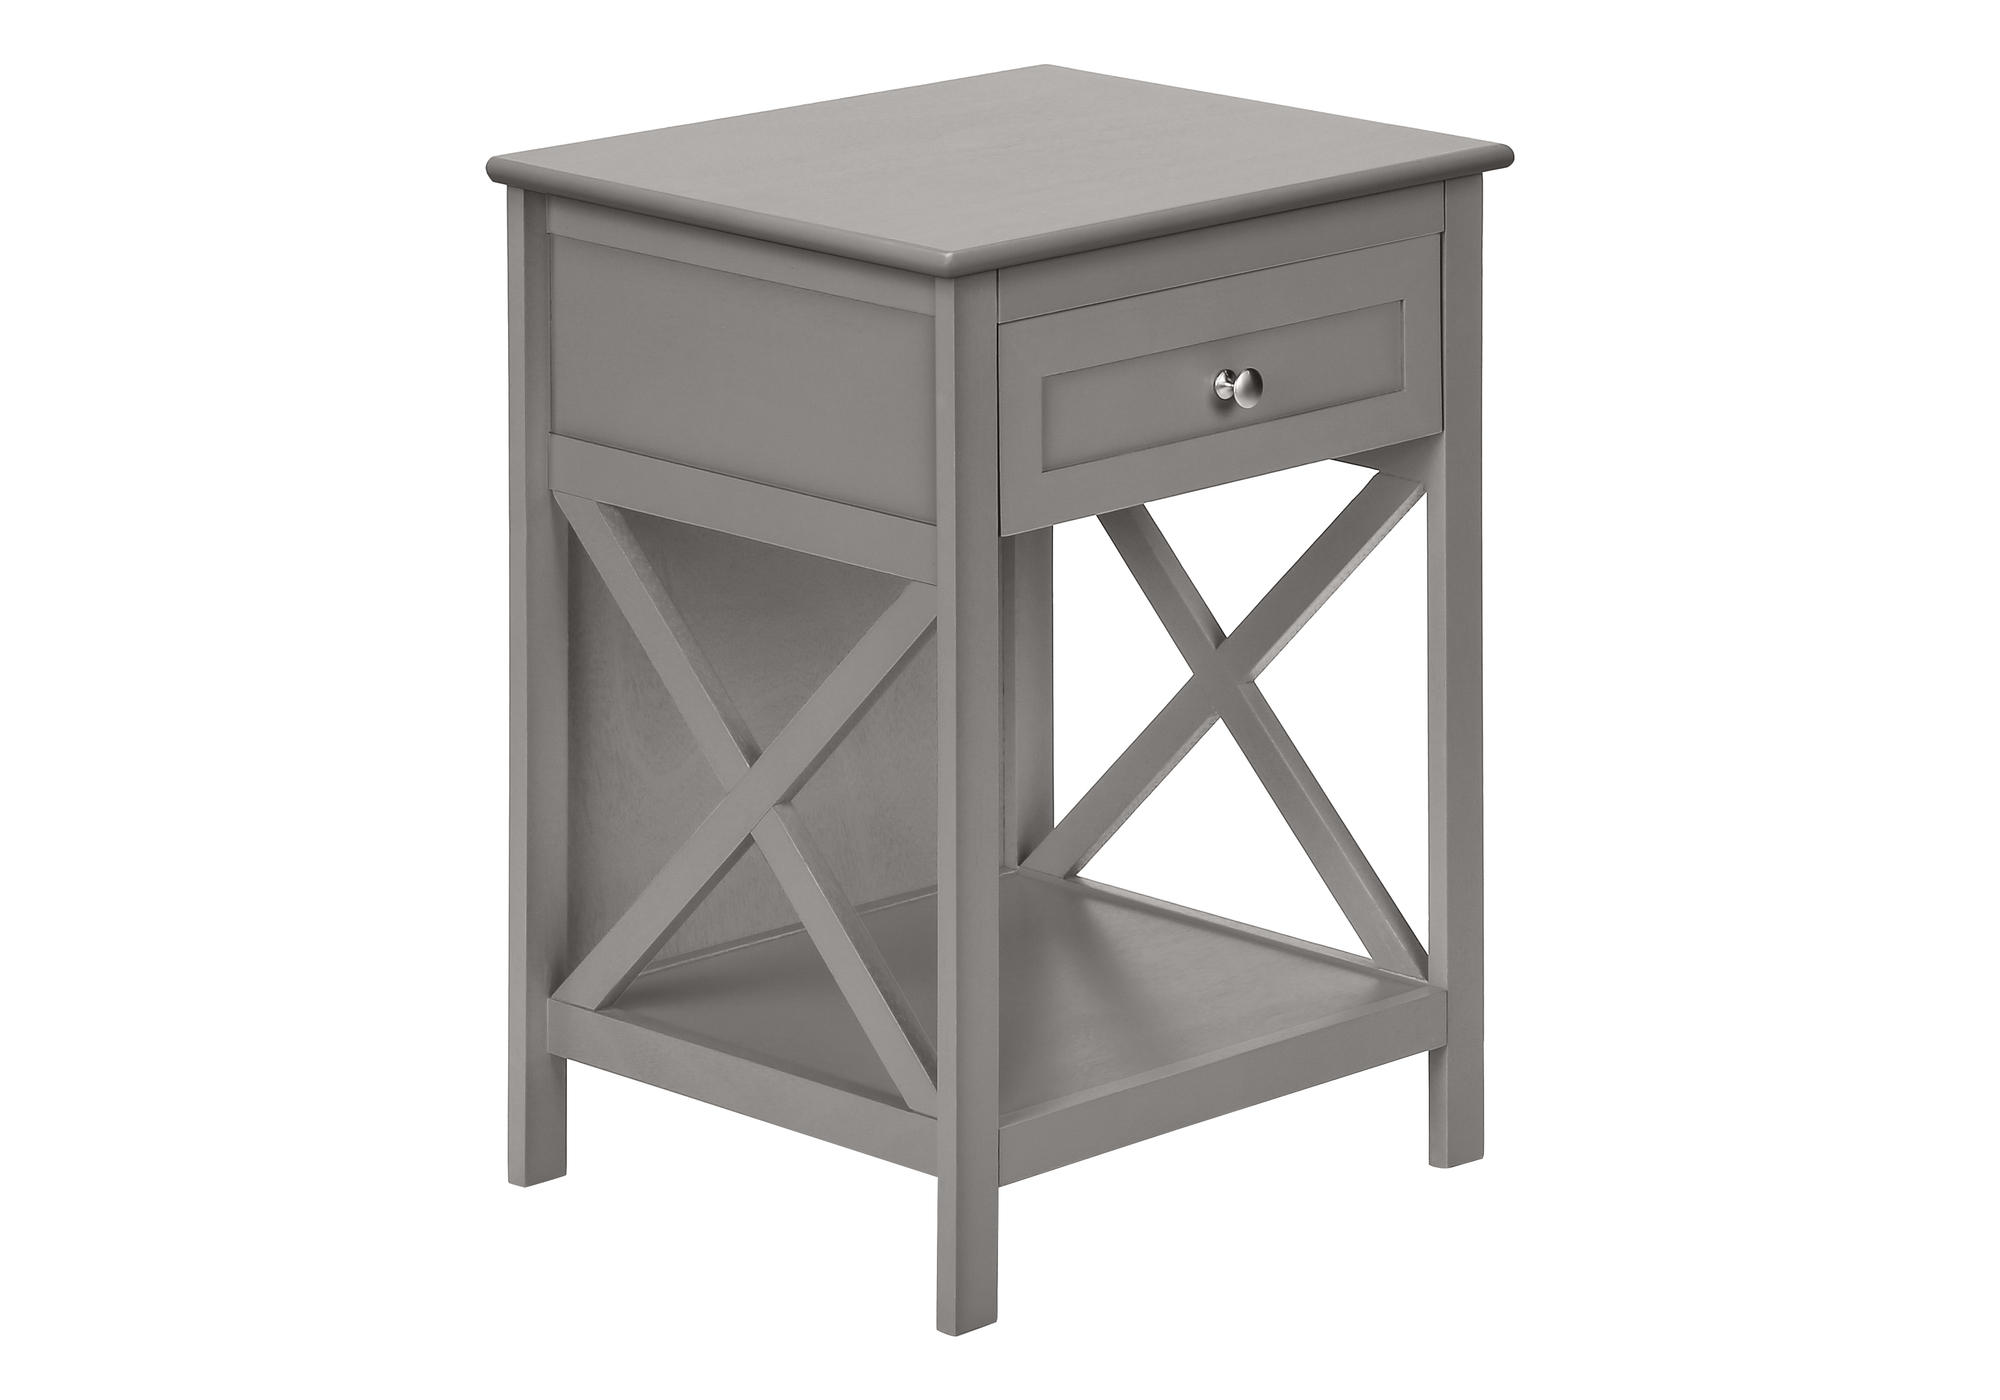 ACCENT TABLE - 25"H / ANTIQUE GREY VENEER END TABLE